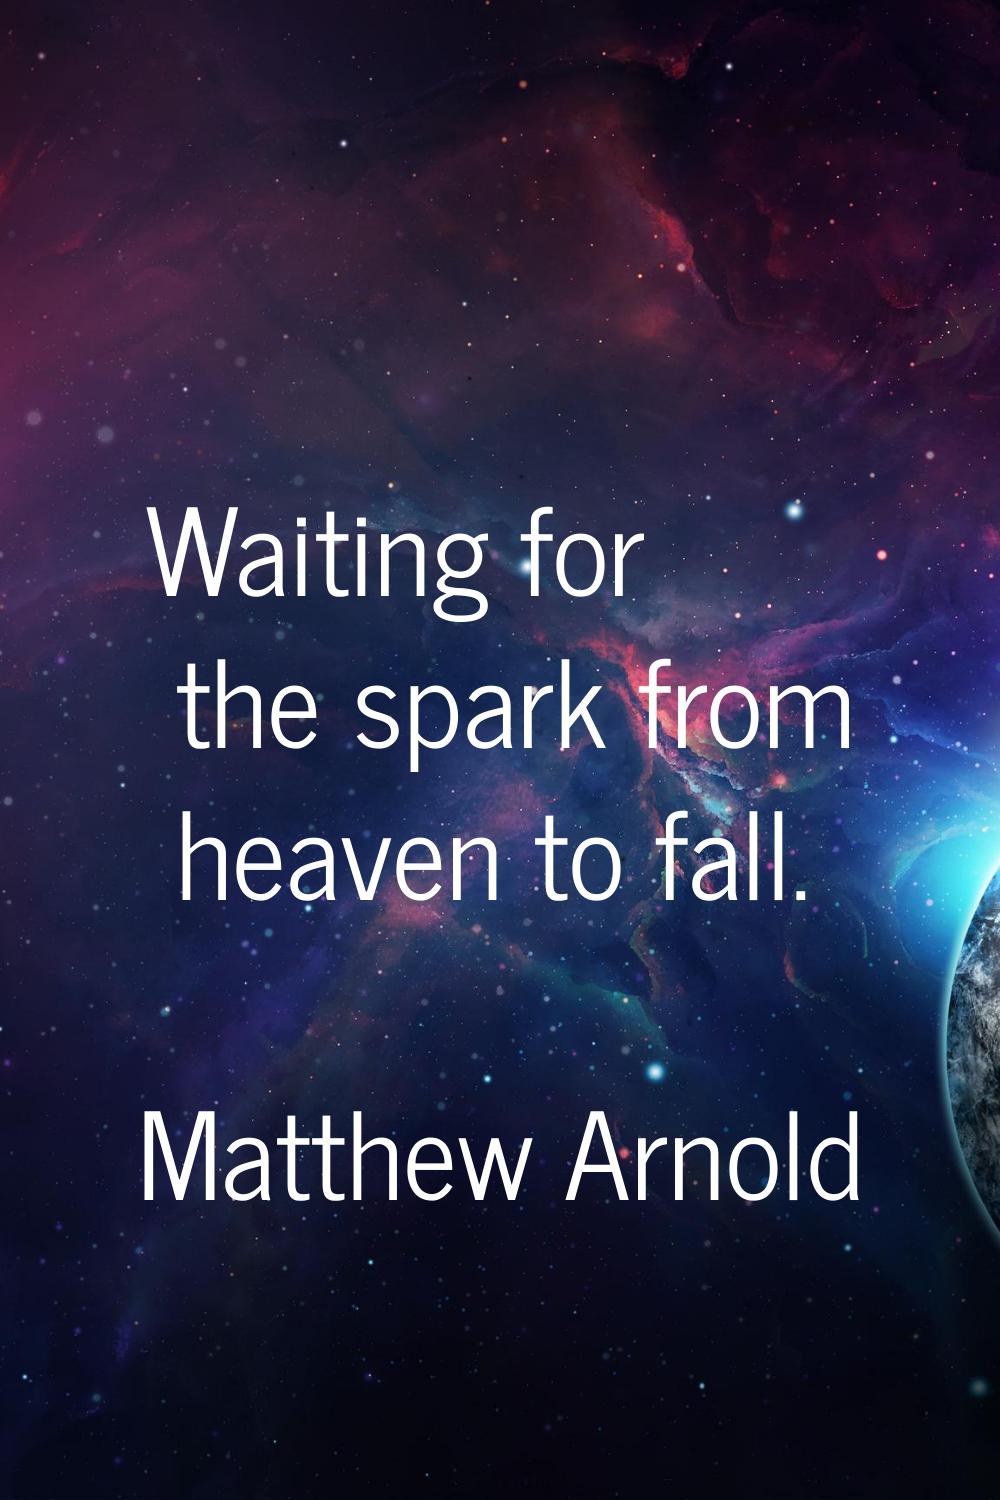 Waiting for the spark from heaven to fall.